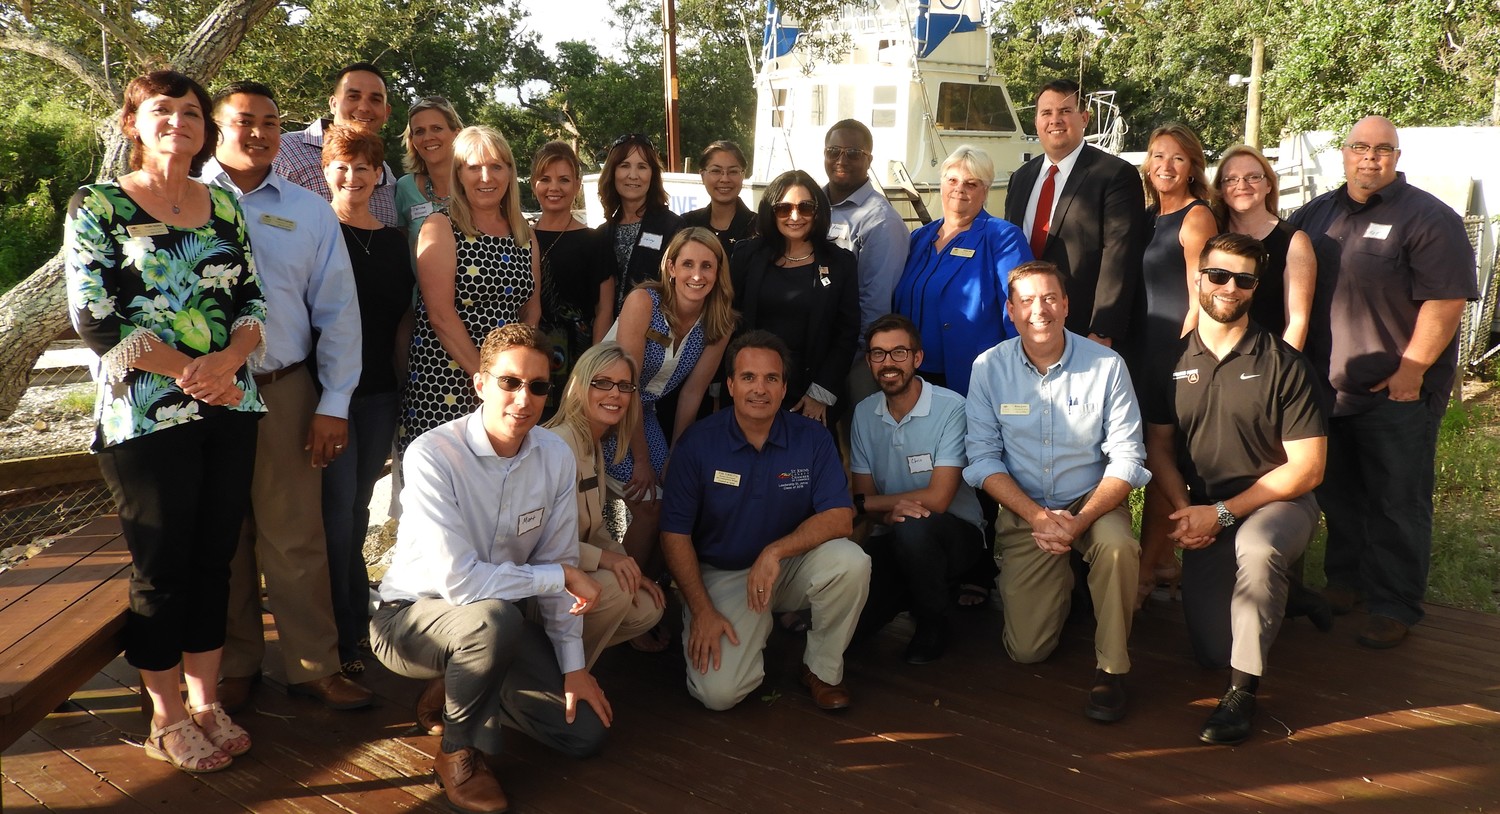 Members of the St. Johns County Chamber of Commerce’s Leadership St. Johns (LSJ) Class of 2018 gather after graduating from the leadership development program.